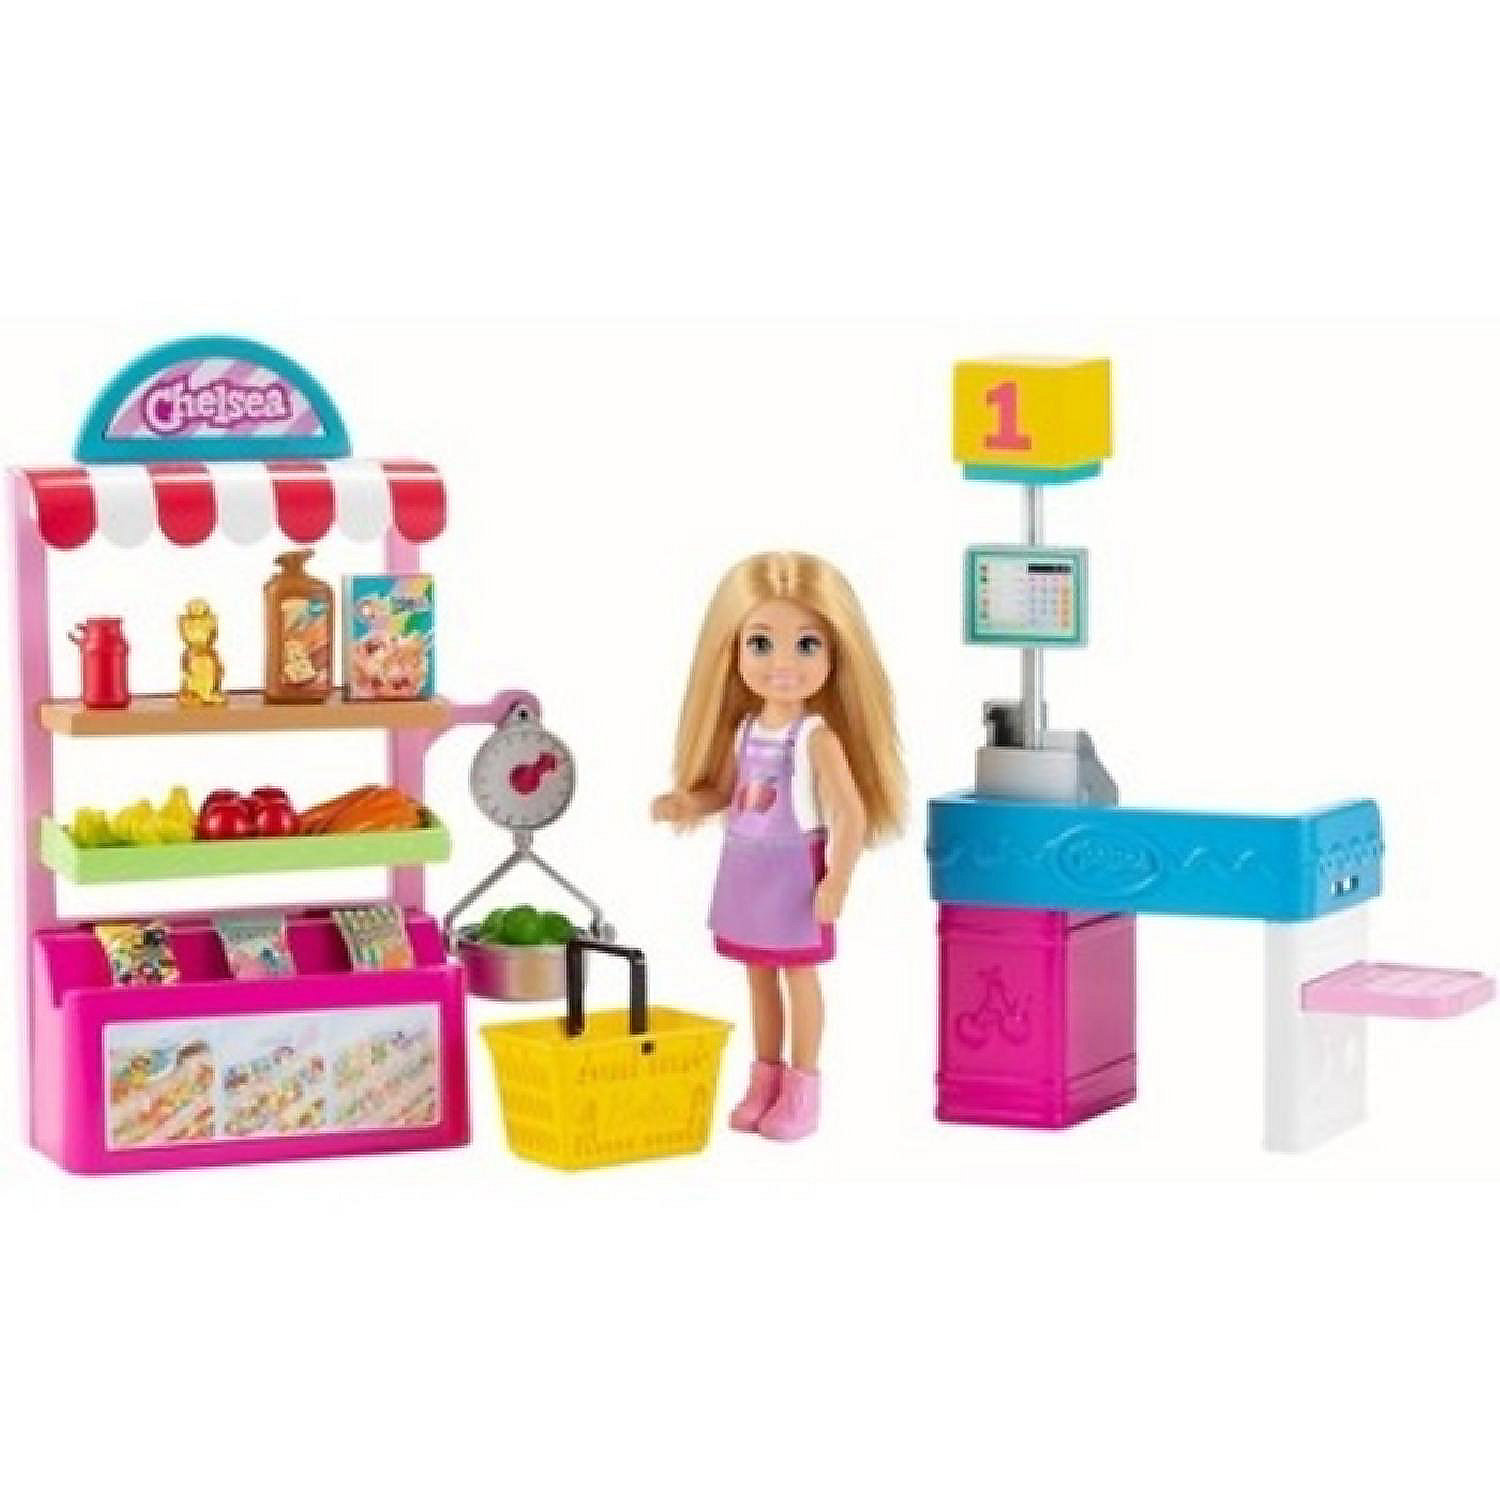 BARBIE™ CHELSEA CAN SNACK STAND PLAYSET WITH BLONDE CHELSEA DOLL PIECES: Oriental Trading